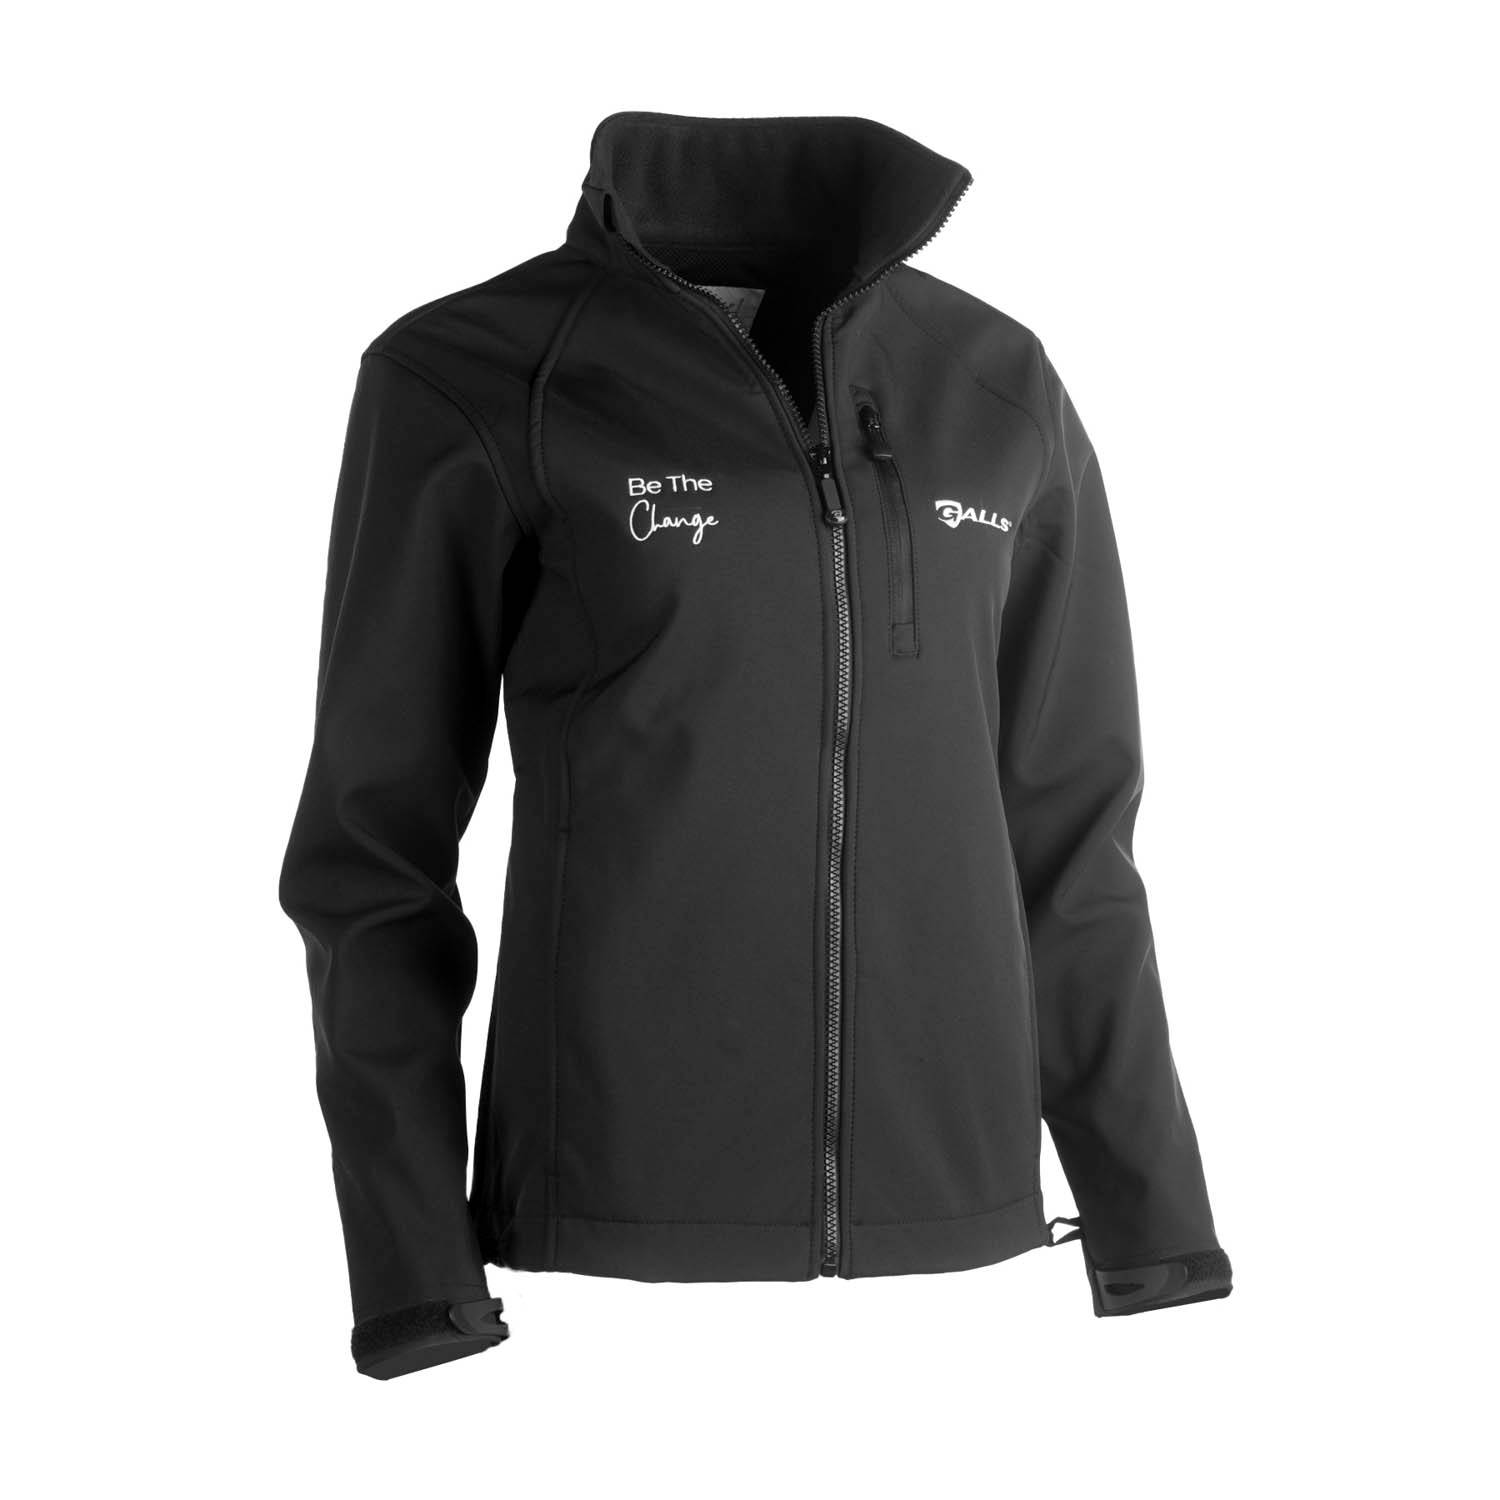 GALLS WOMEN'S "BE THE CHANGE" SOFT SHELL JACKET